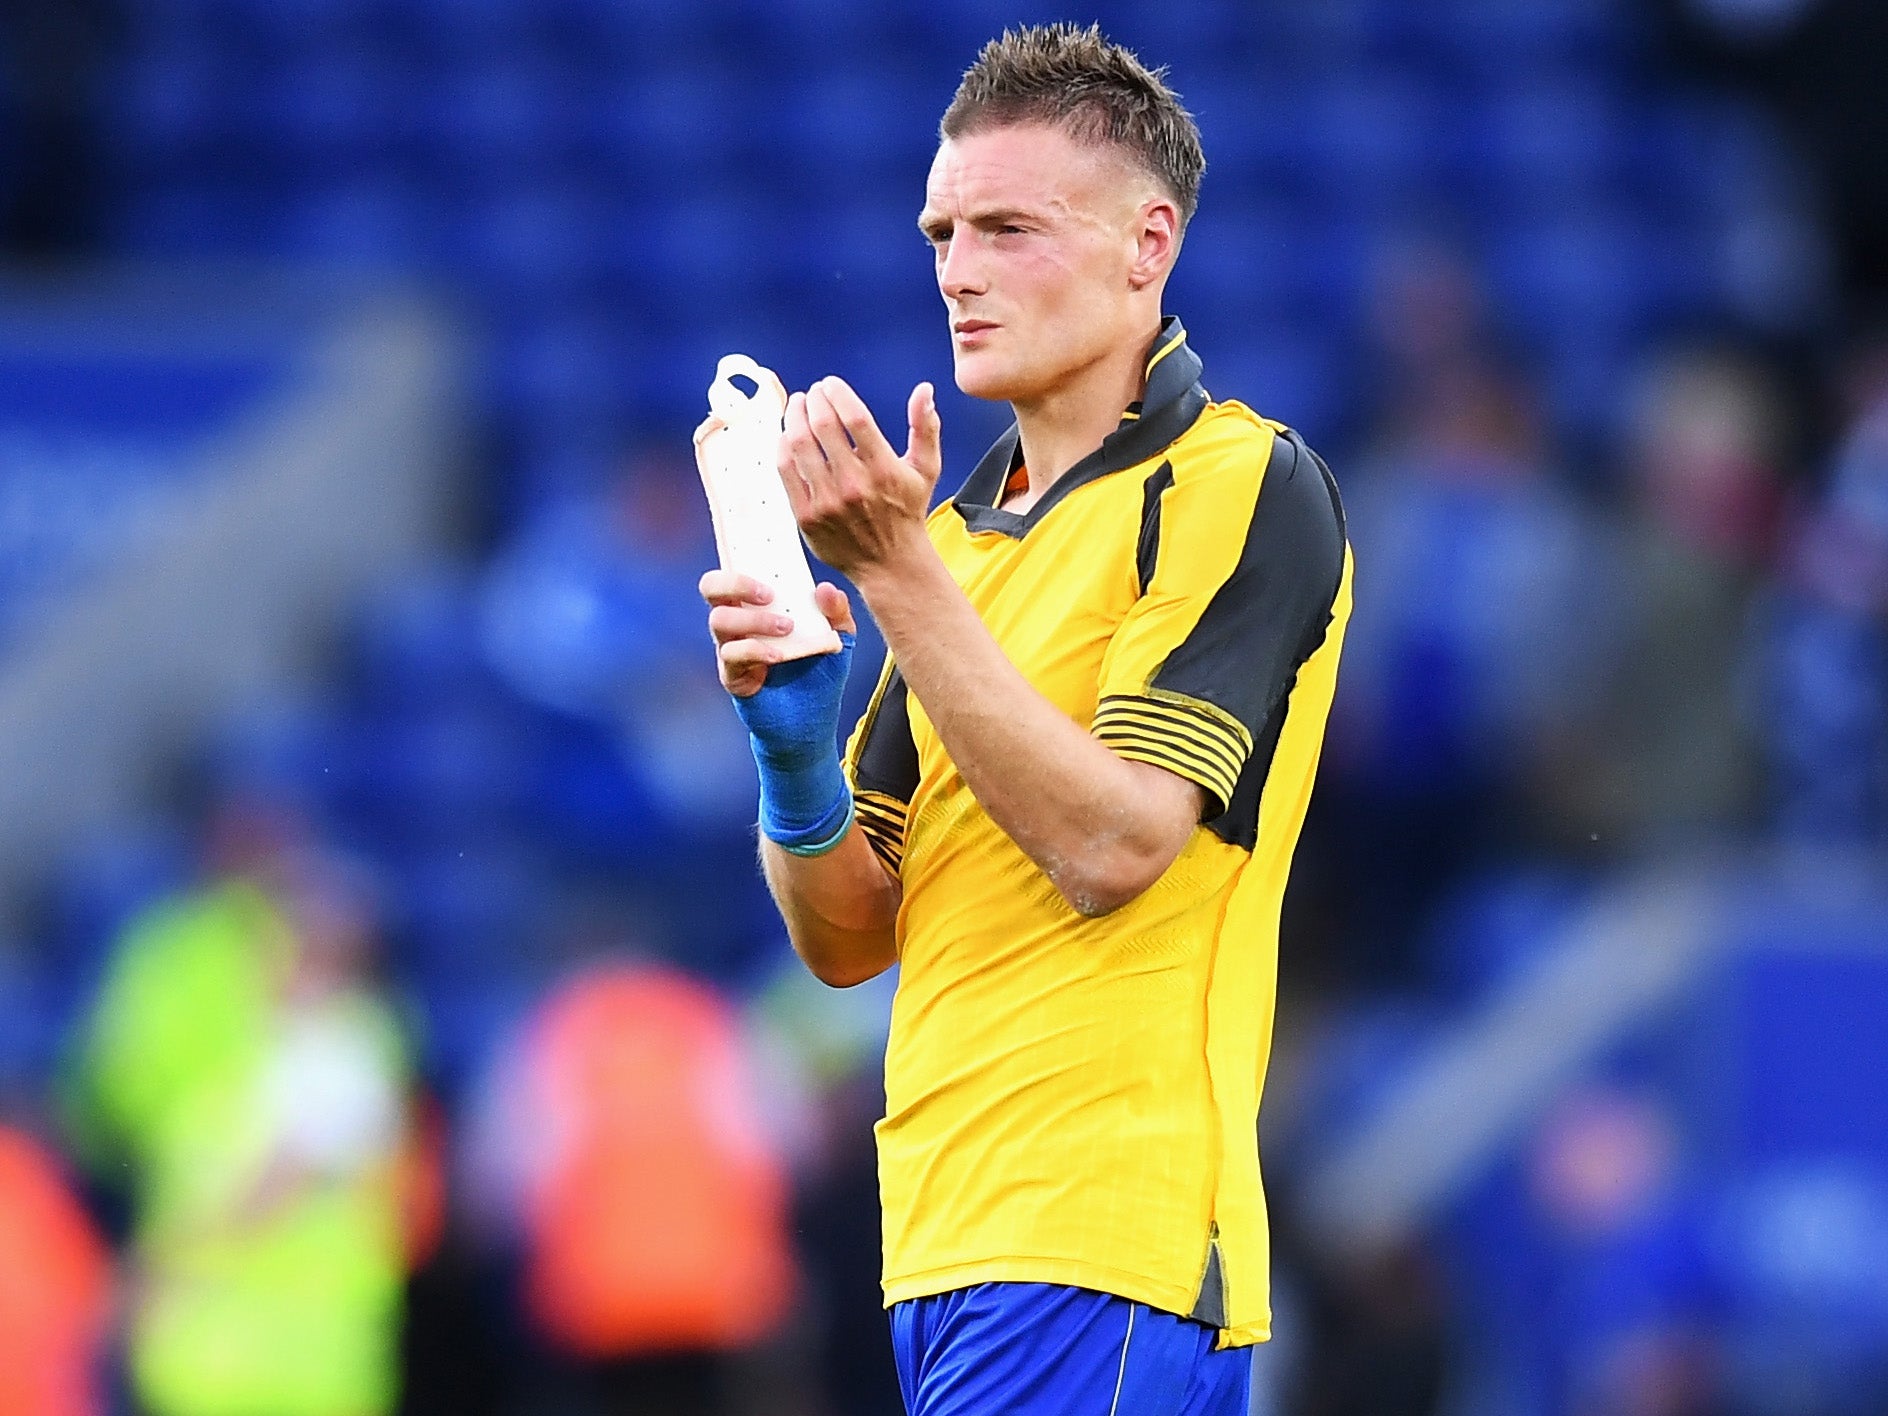 Vardy said it was an 'easy decision' to turn down Arsenal